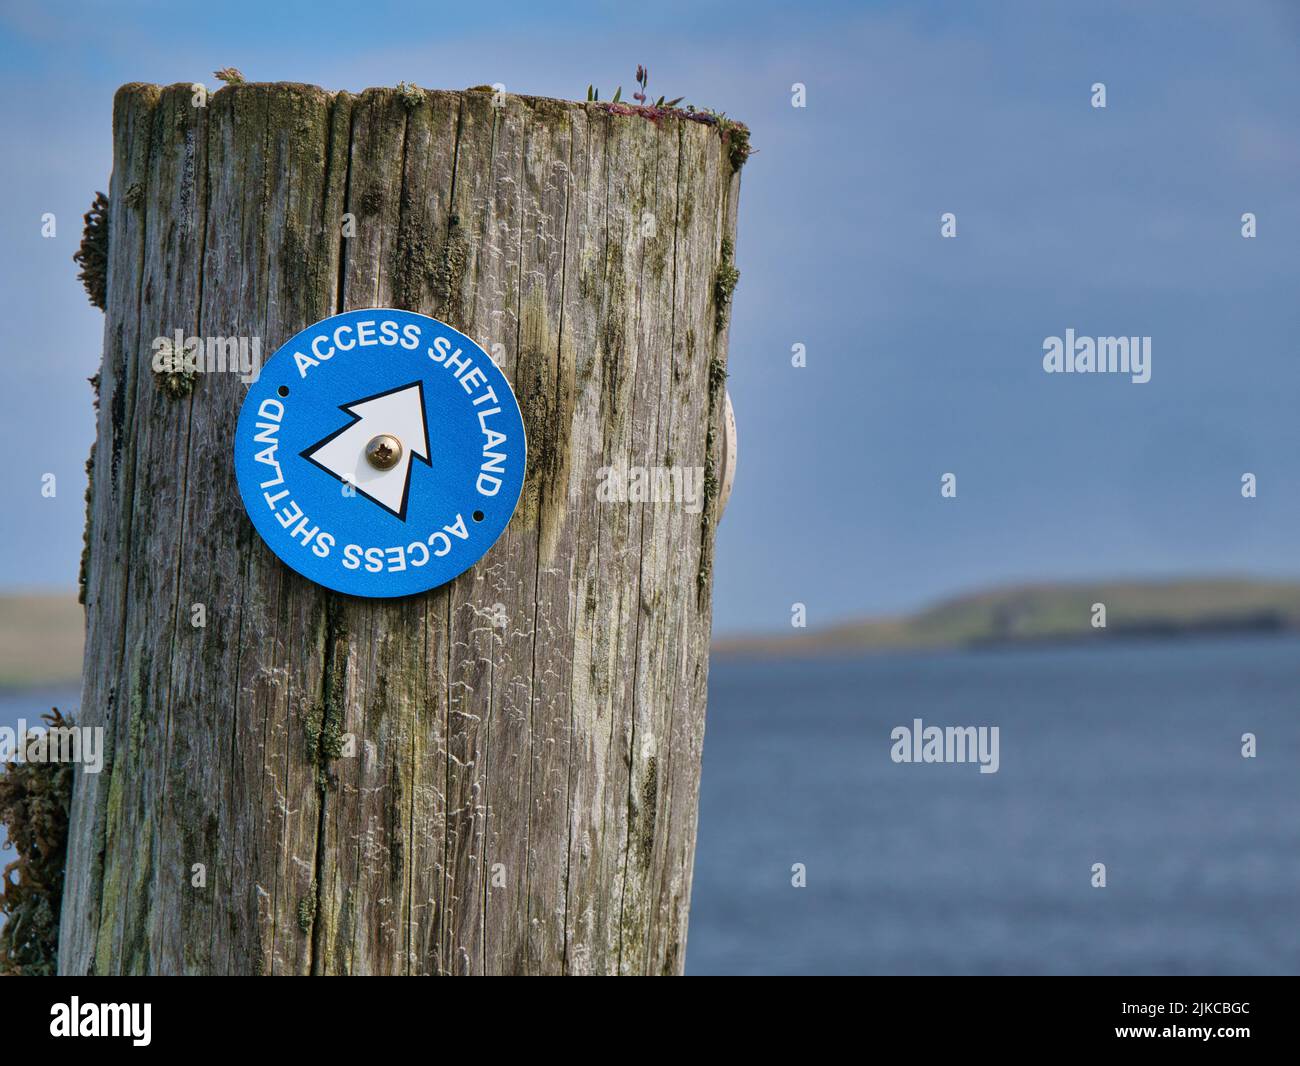 Fixed to a wooden post on the coast, a blue and white Access Shetland sign near Sandwick in Shetland, UK shows the way to walkers and hikers. Stock Photo